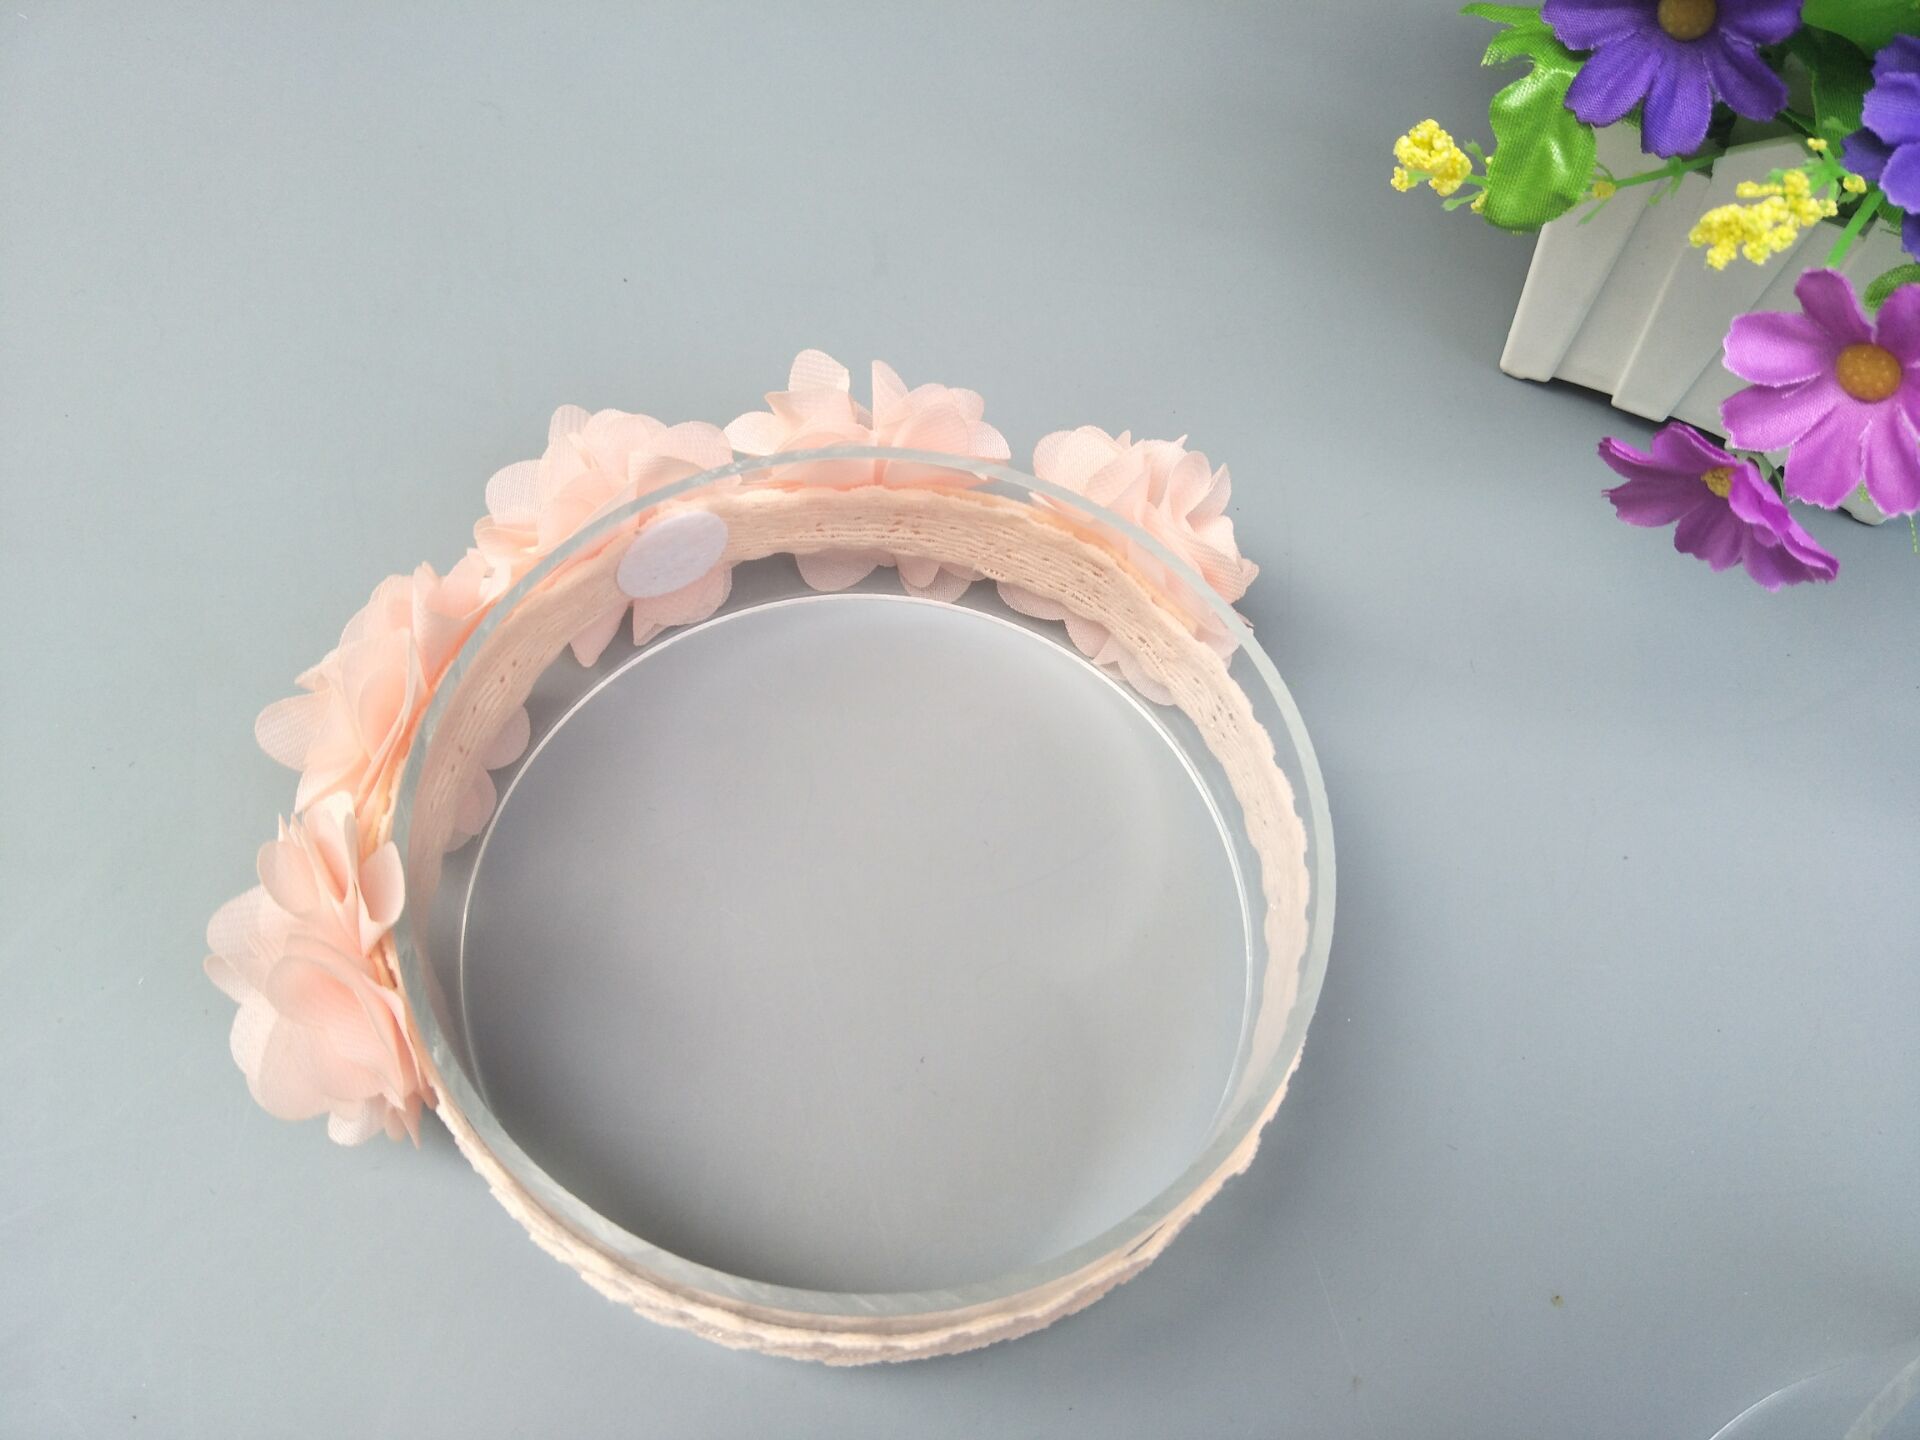 2019 New Lace Flower Kids Baby Girl Toddler Headband Hair Band Headwear Accessories Lace Flower Headband Baby Photo Props